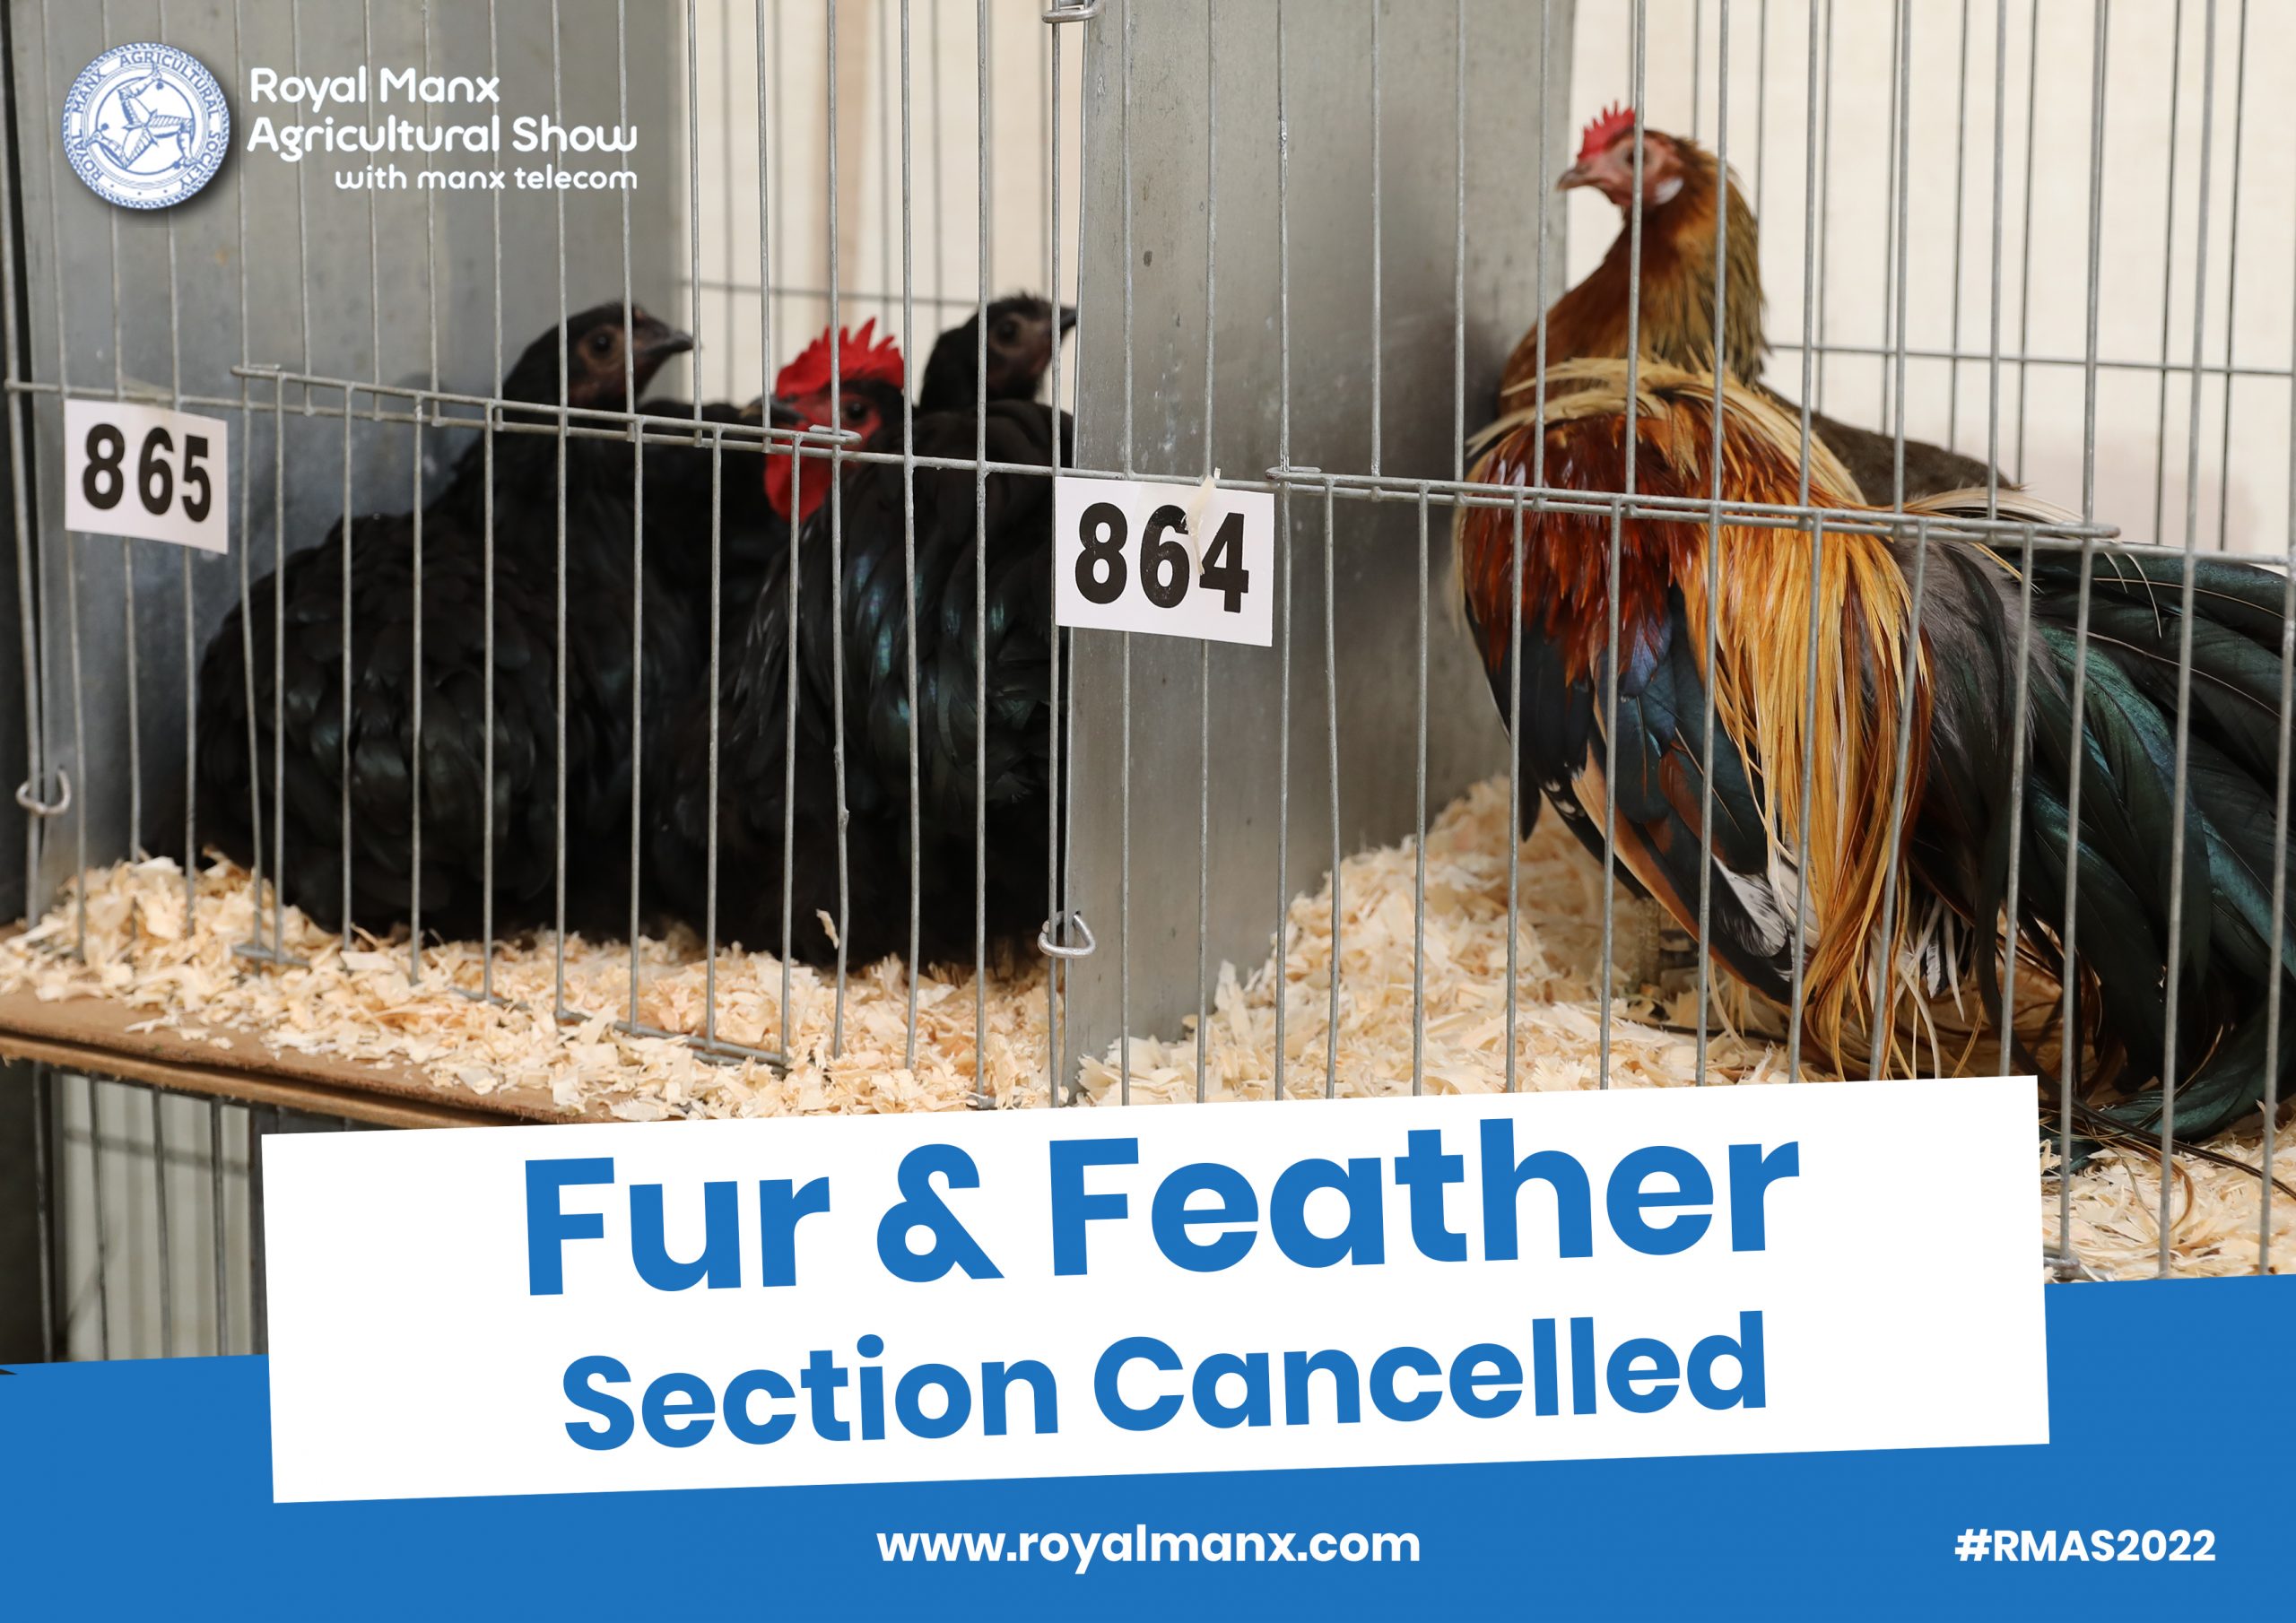 Fur & Feather Cancelled